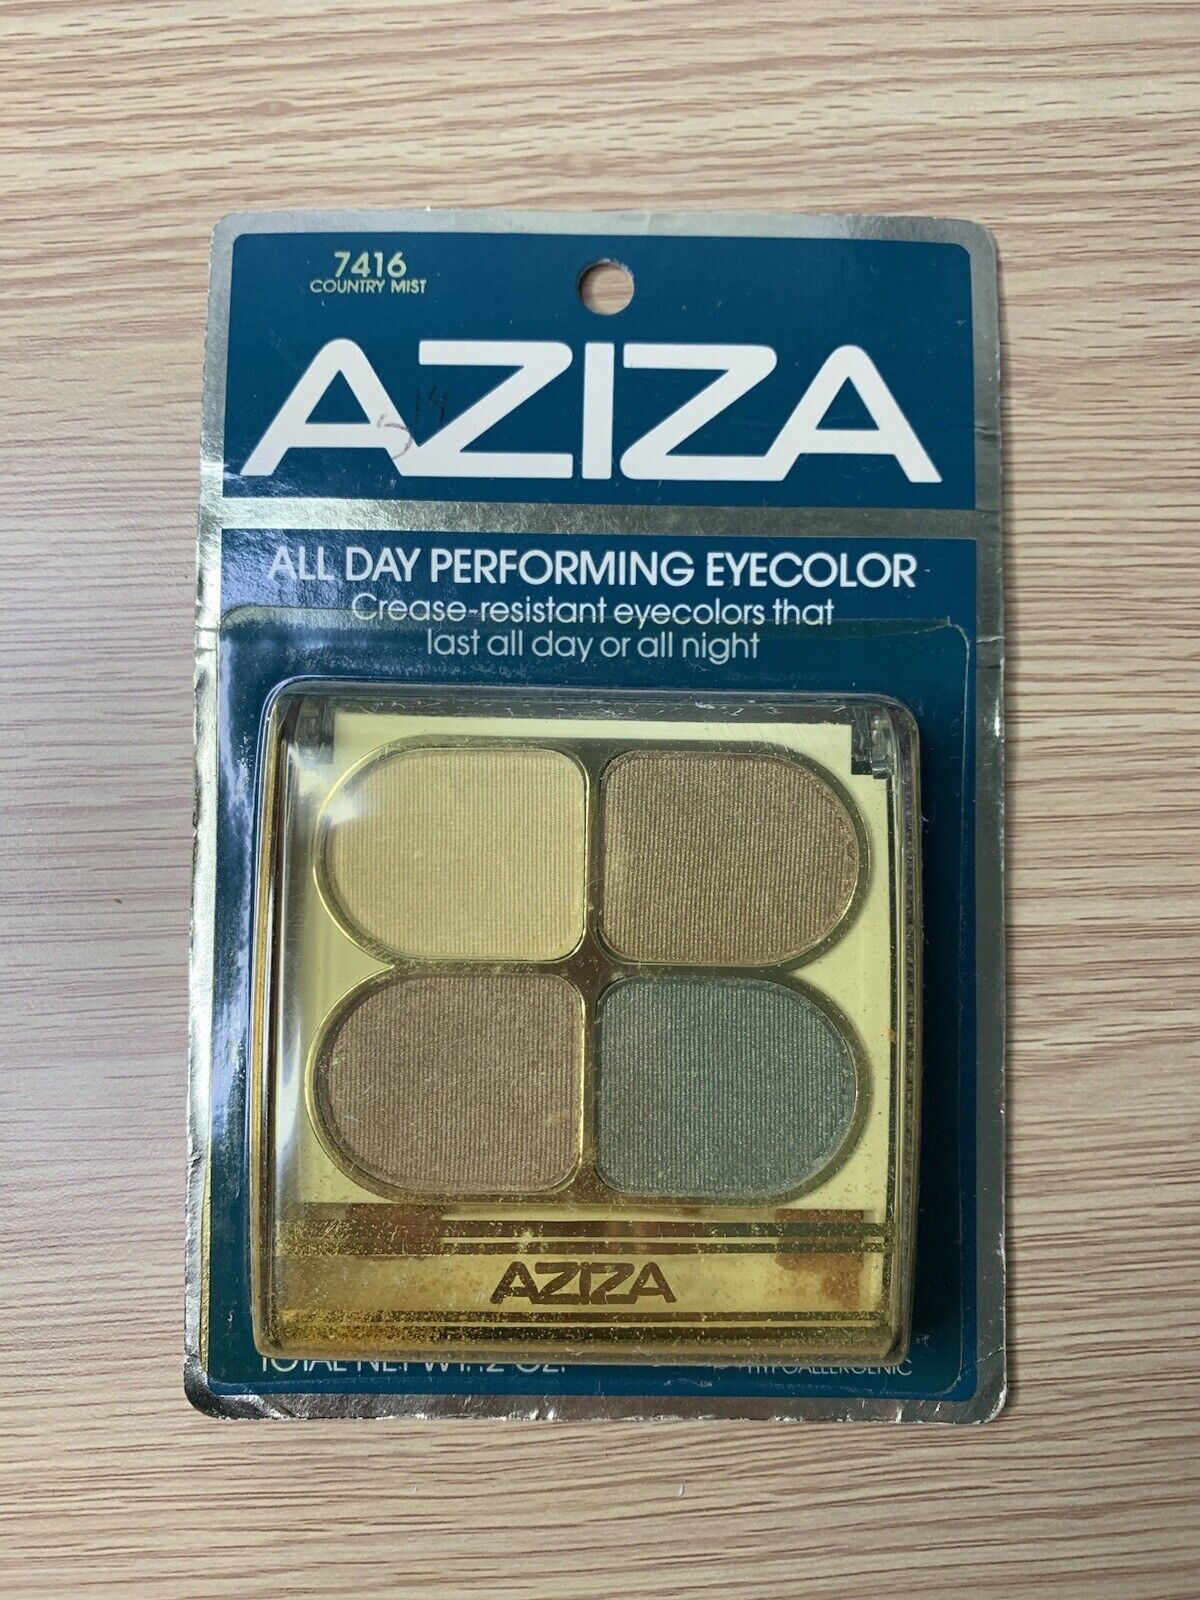 Vintage 80s Aziza Eye Shadow 1982 Prop 7416 Country Mist all day performing eye